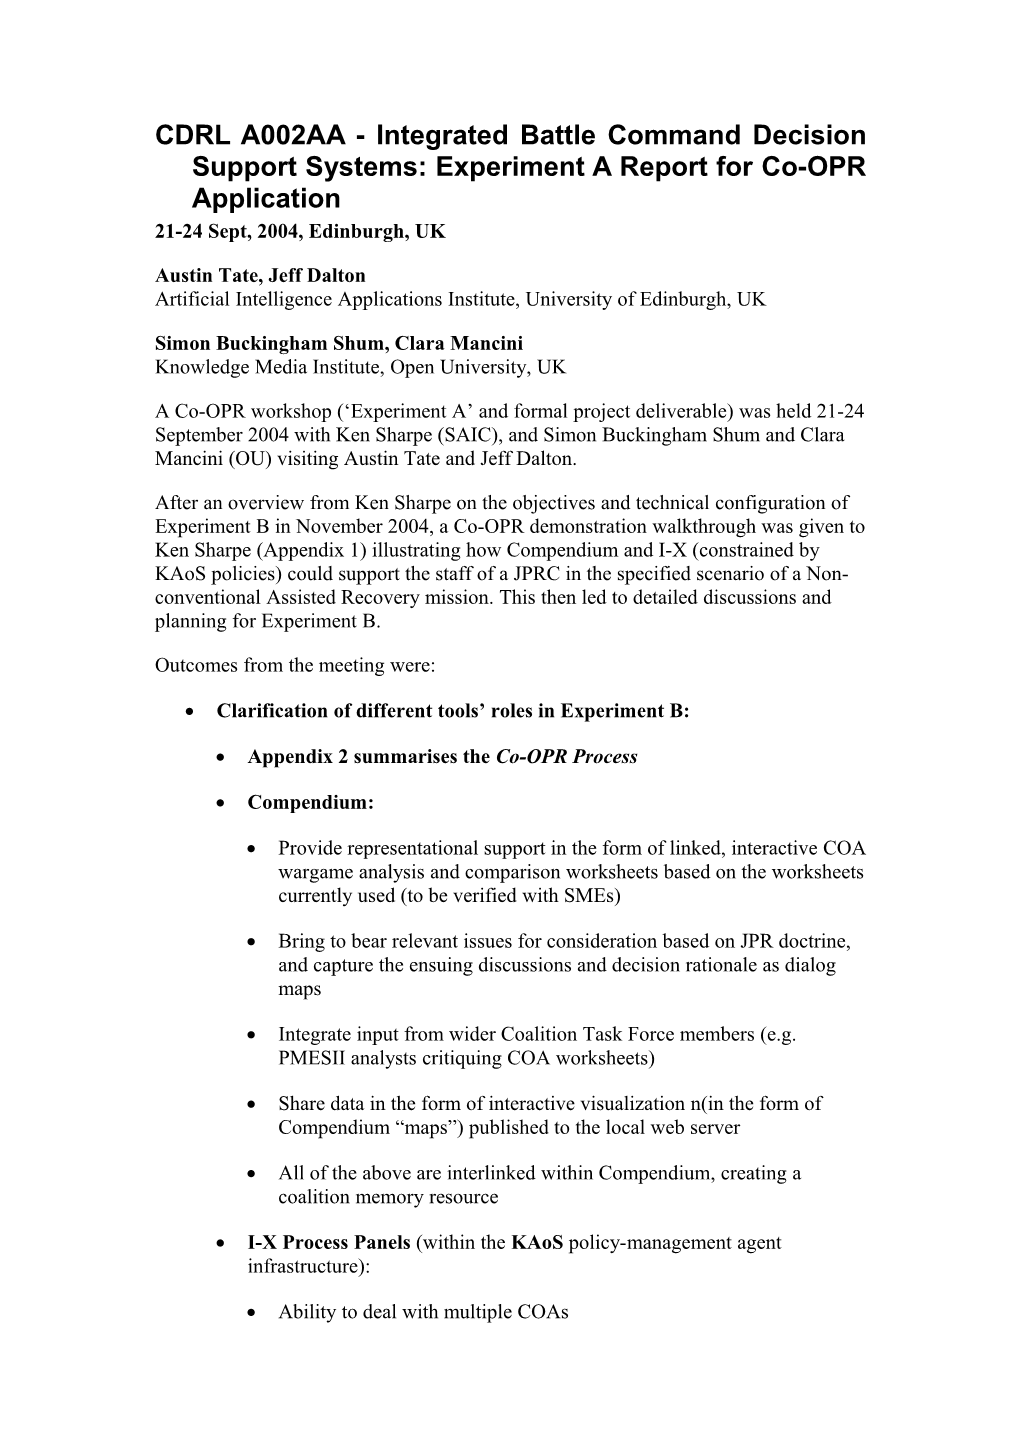 CDRL A002AA - Integrated Battle Command Decision Support Systems: Experiment a Report For